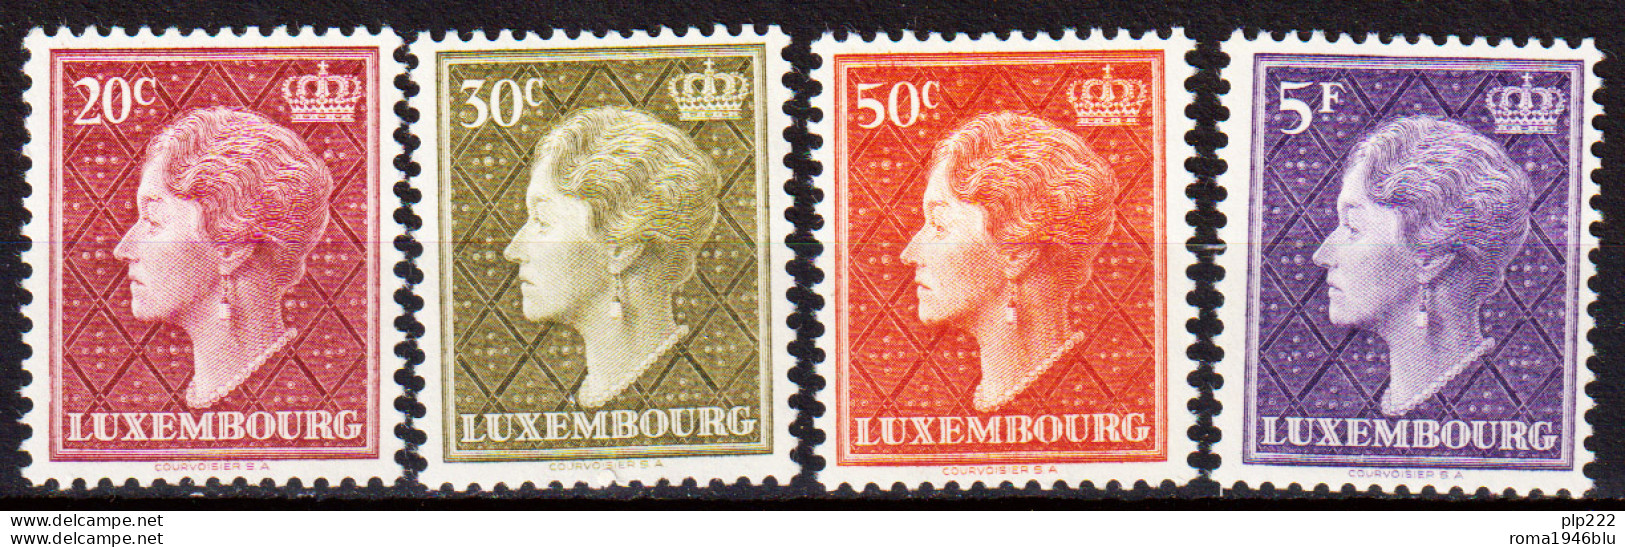 Lussemburgo 1958 Unif.544A/47 **/MNH VF - Unused Stamps